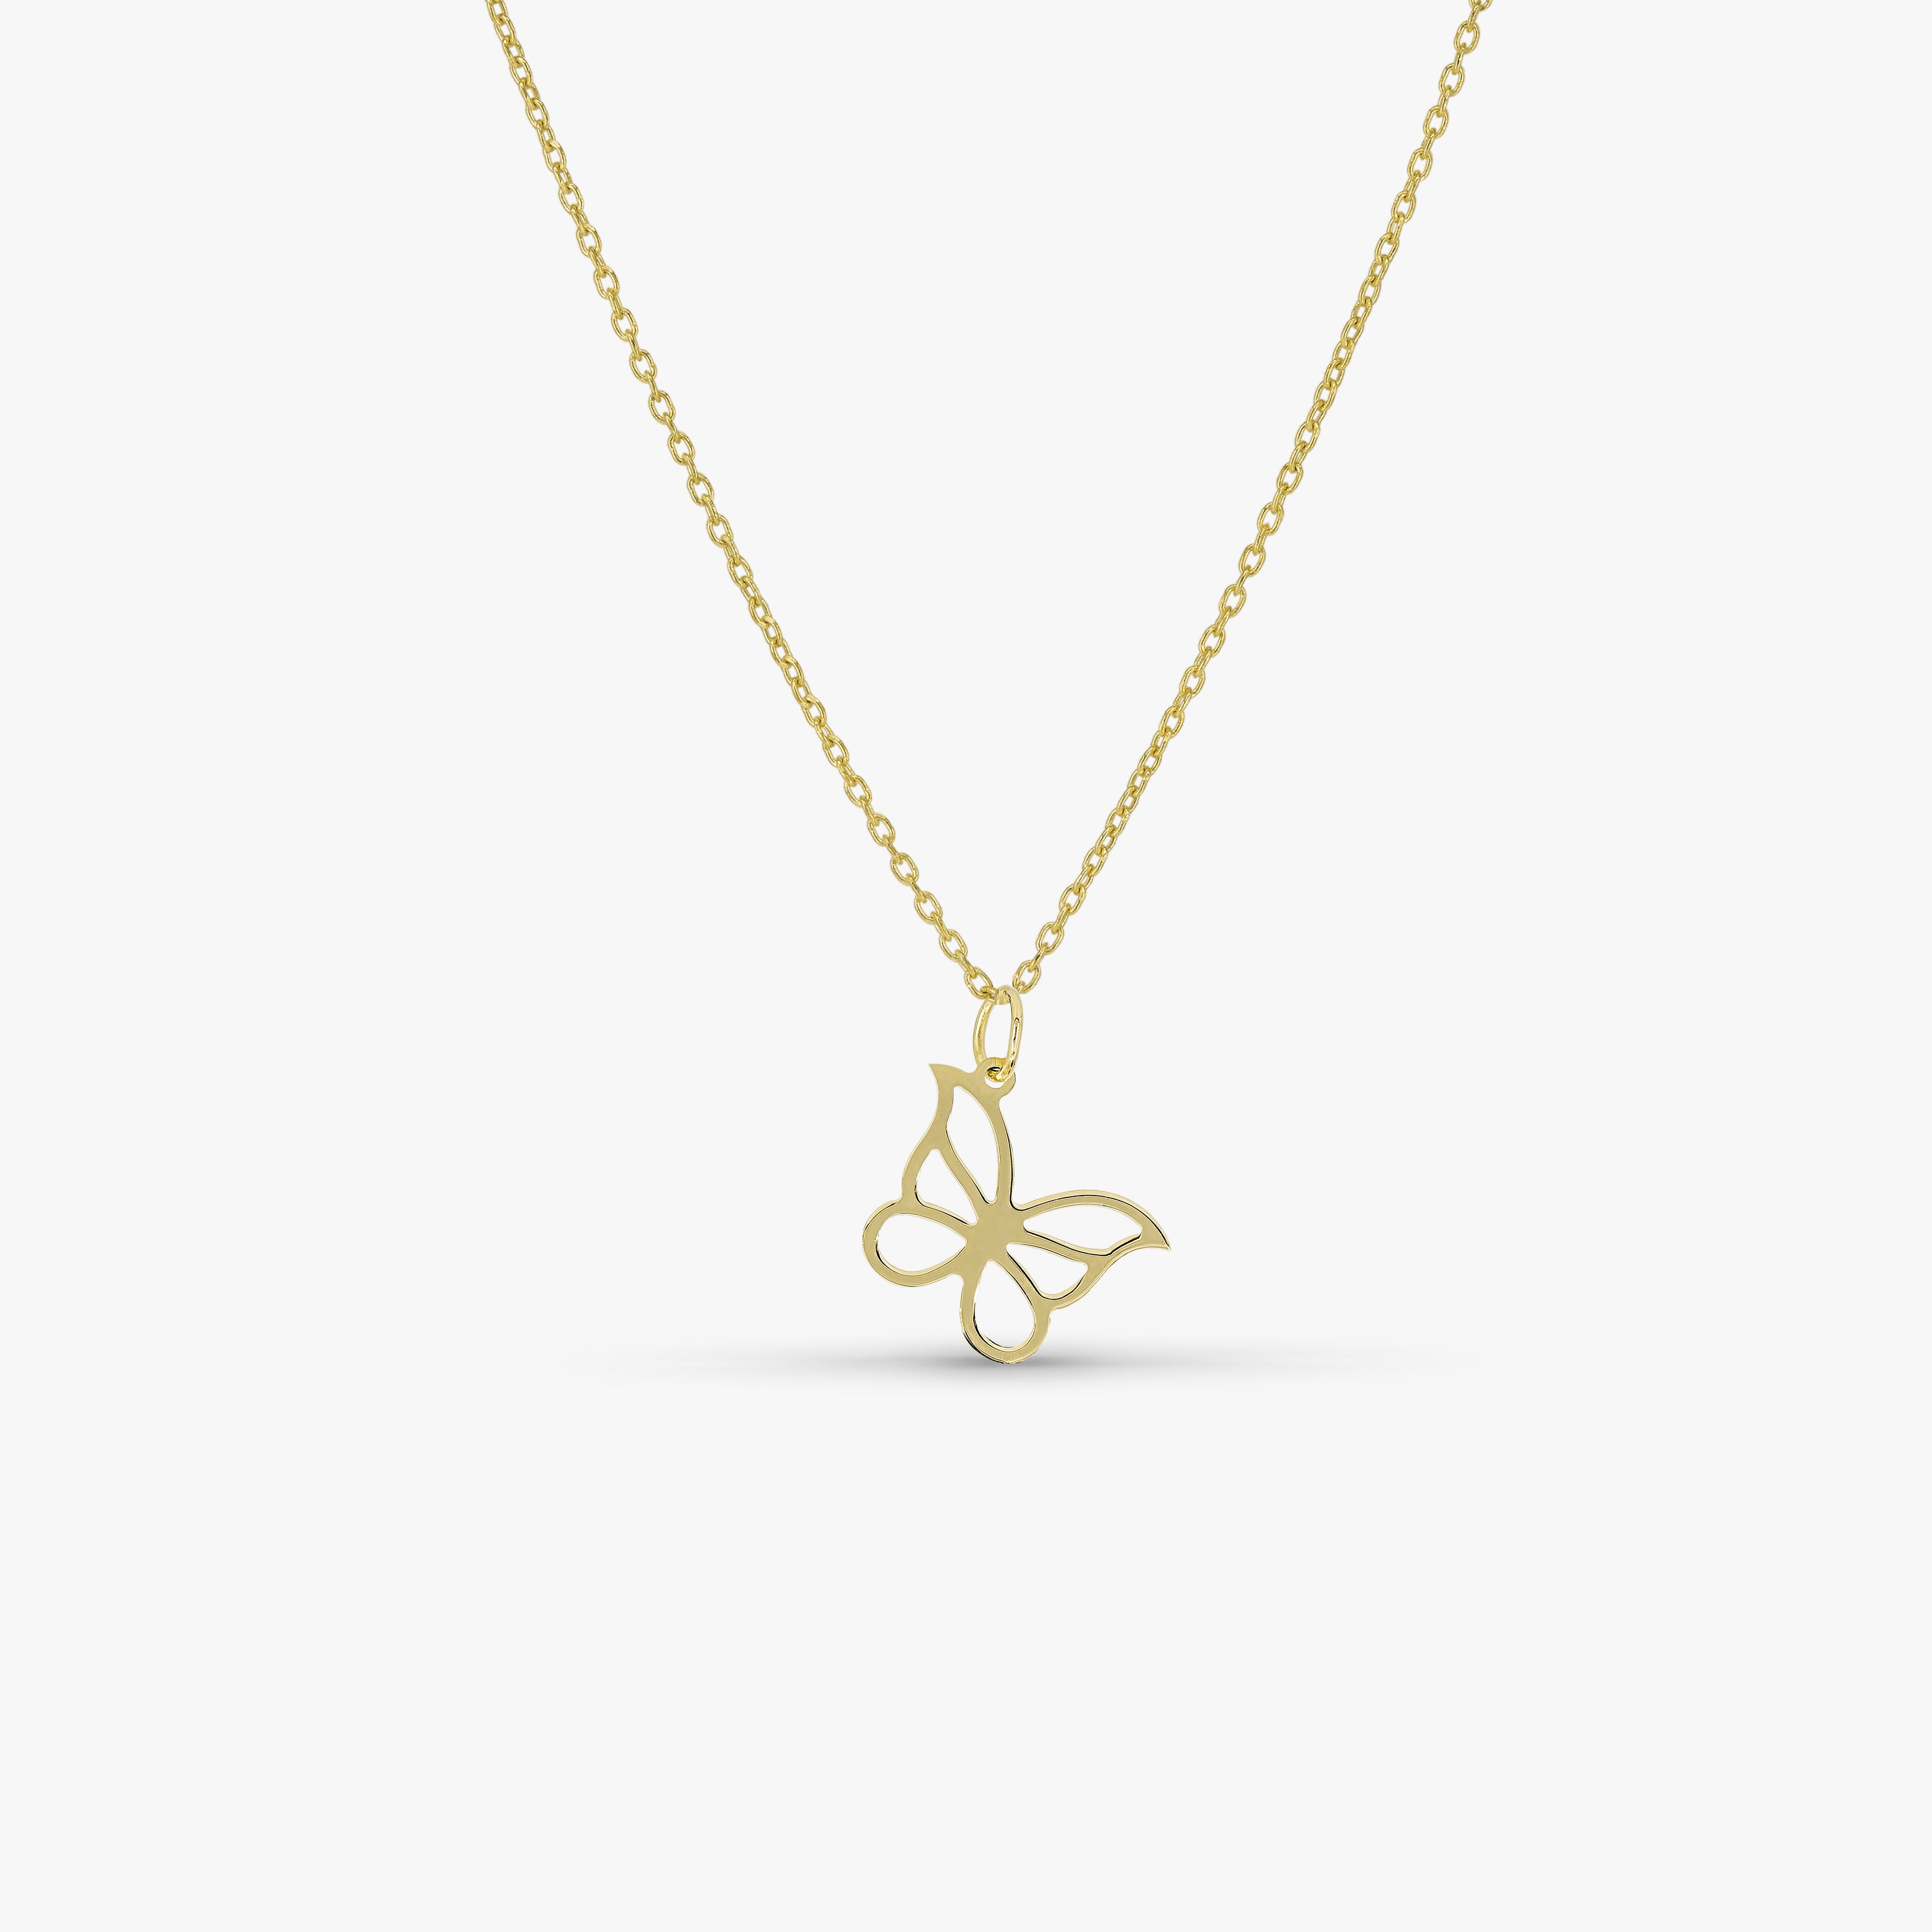 Butterfly Pendant Necklace in 14K Gold